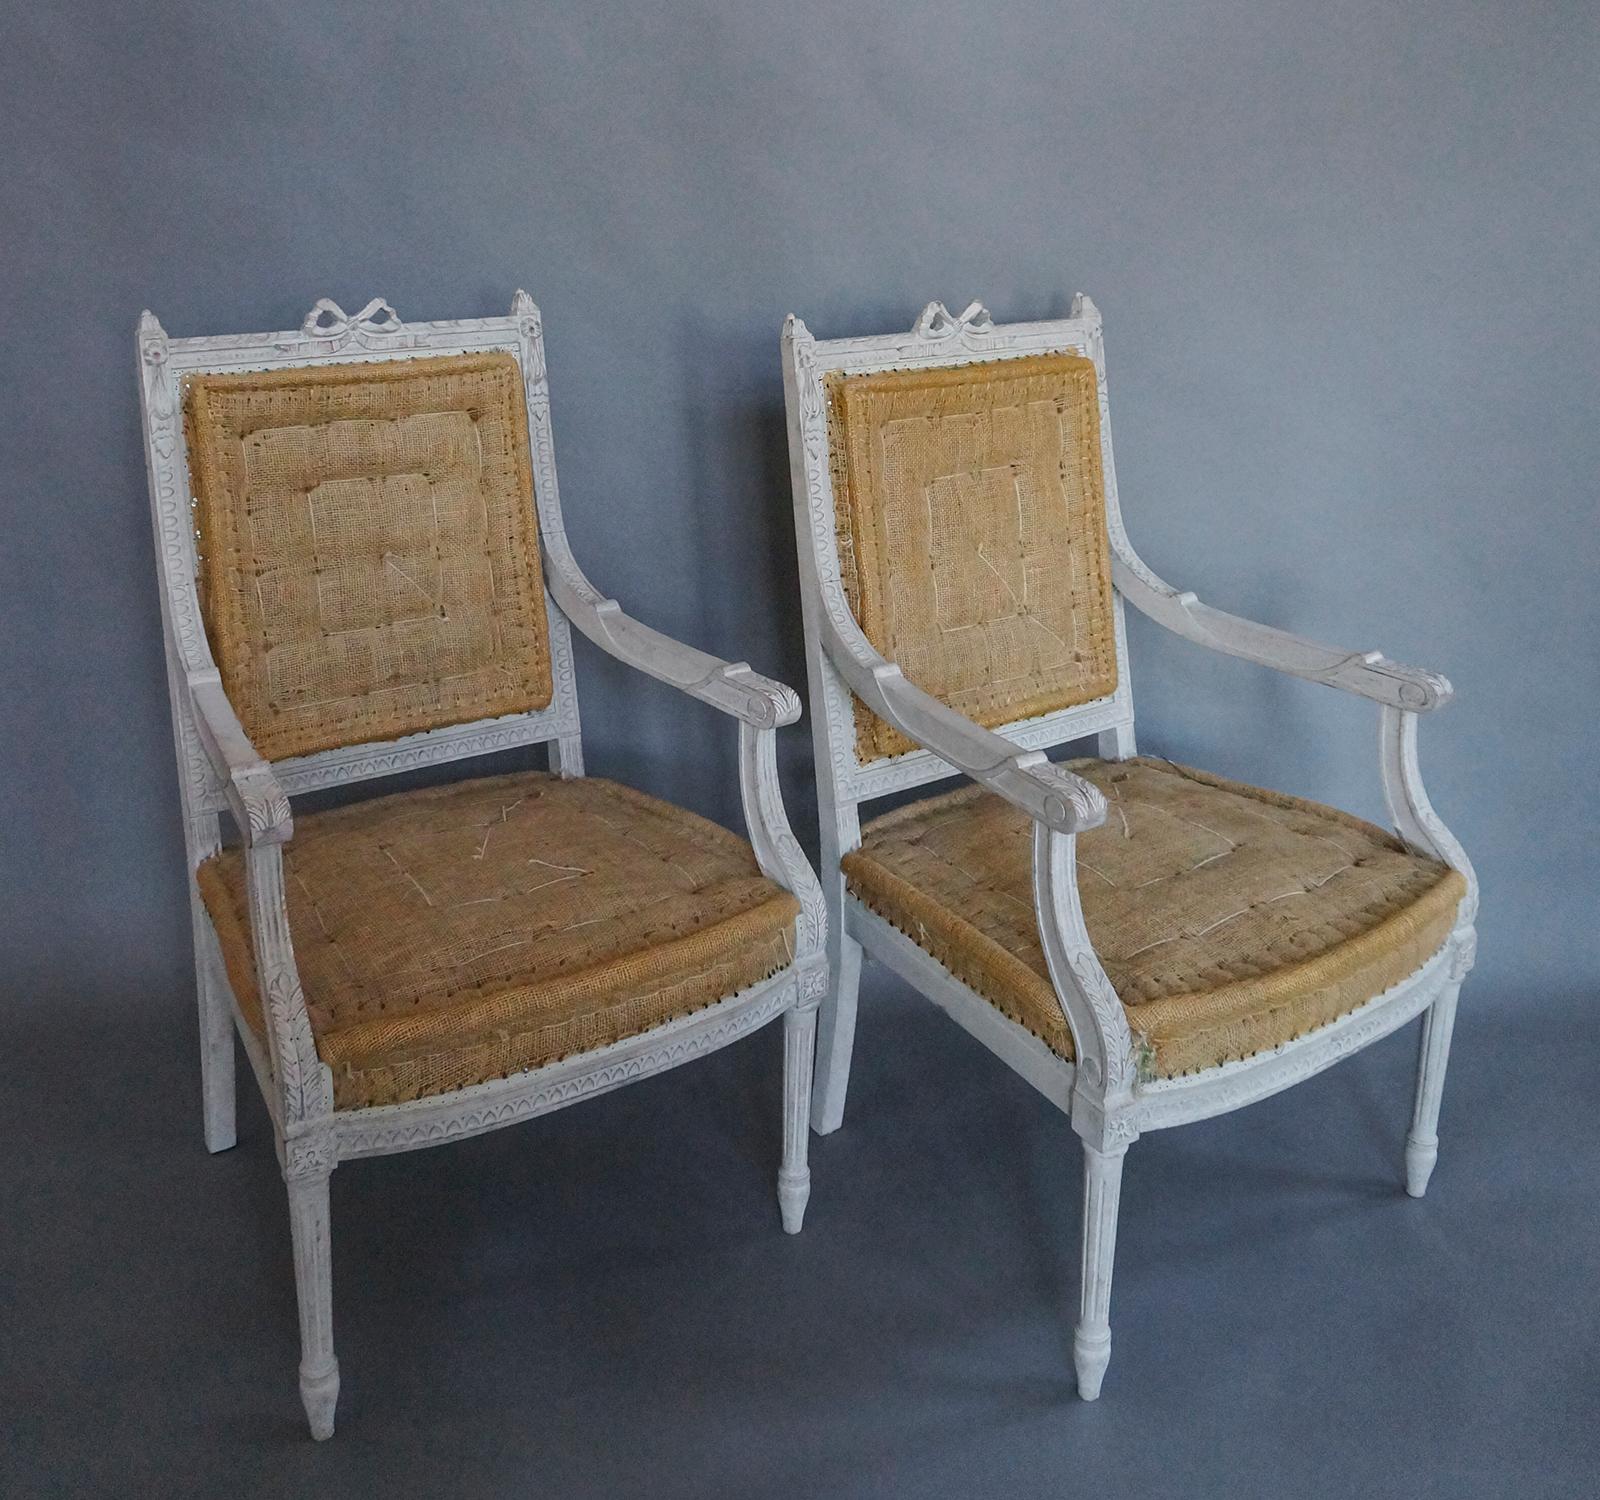 Pair of Gustavian style armchairs, Sweden, circa 1900, with nicely carved detail. Solid back with a carved bow in the center and foliate swags at the sides. The arms have space for upholstered manchettes. Lambs tongue molding covers the rounded